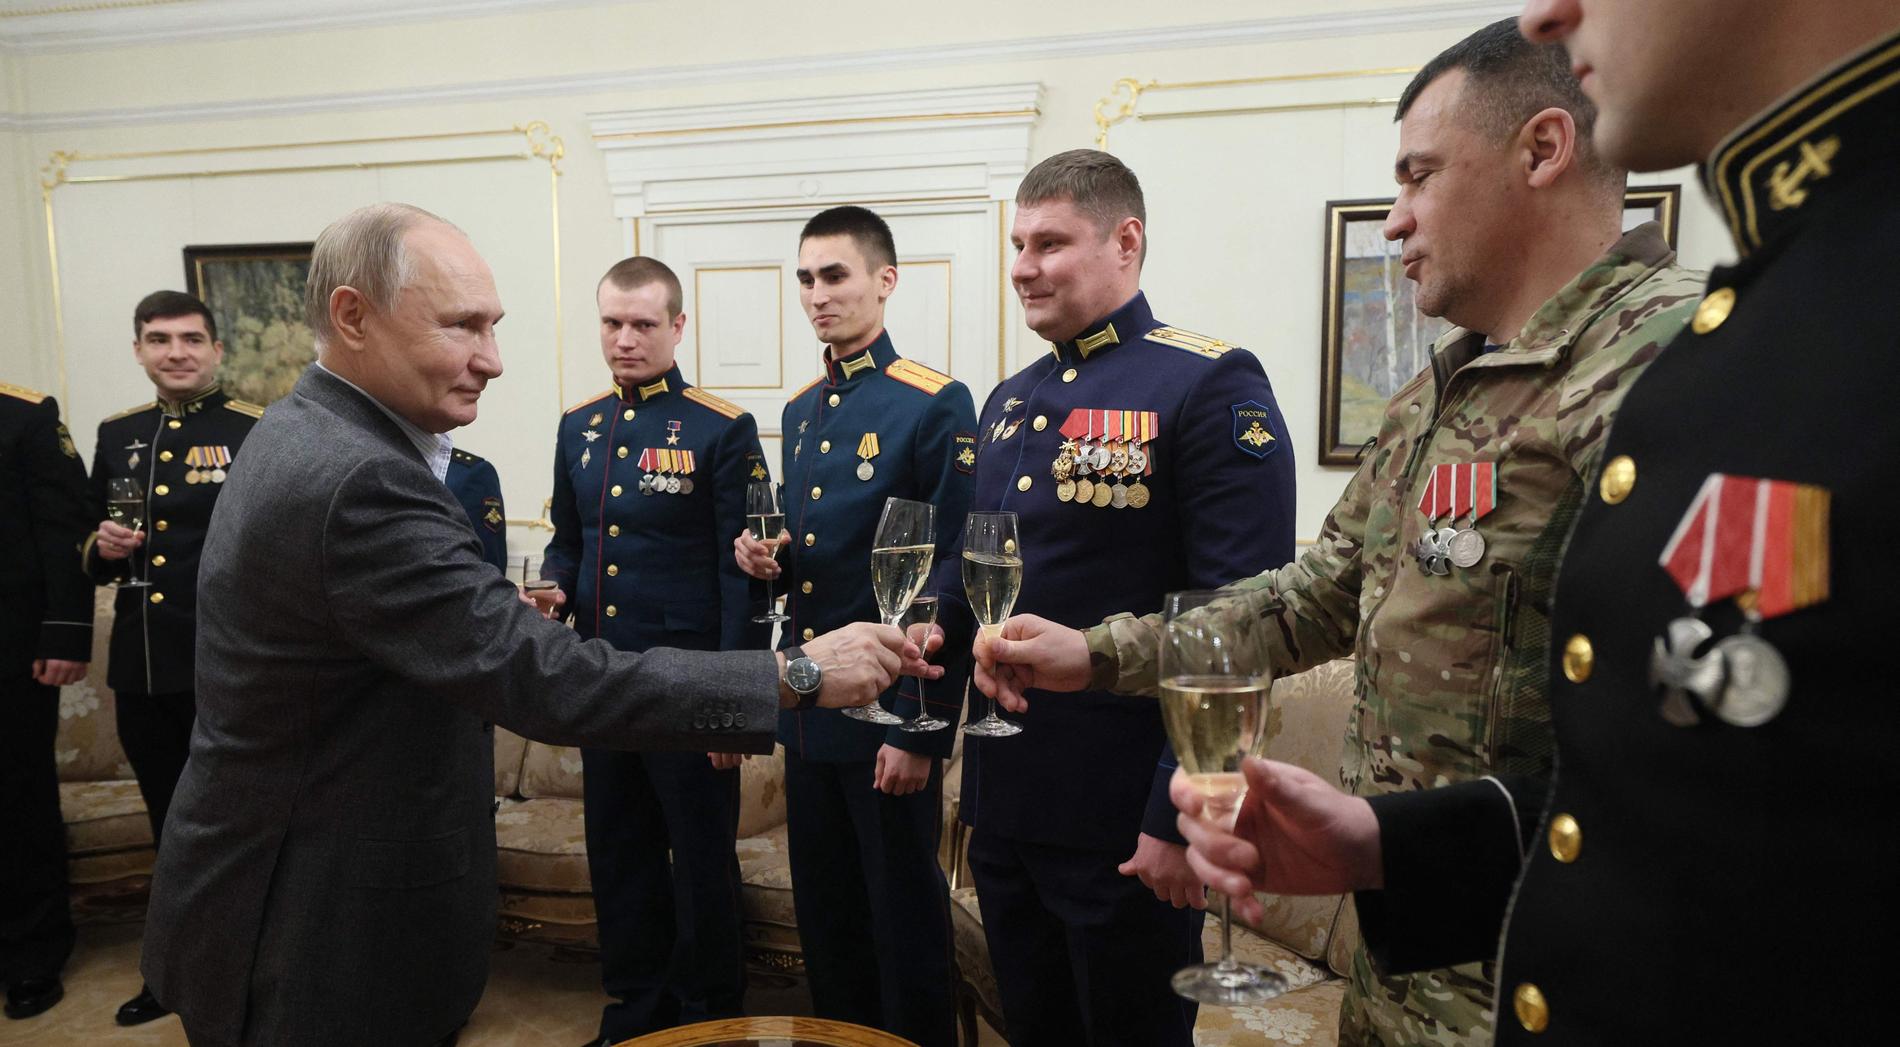 Vladimir Putin Holds Reception for Russian Soldiers after Deadly New Year’s Attacks in Ukraine